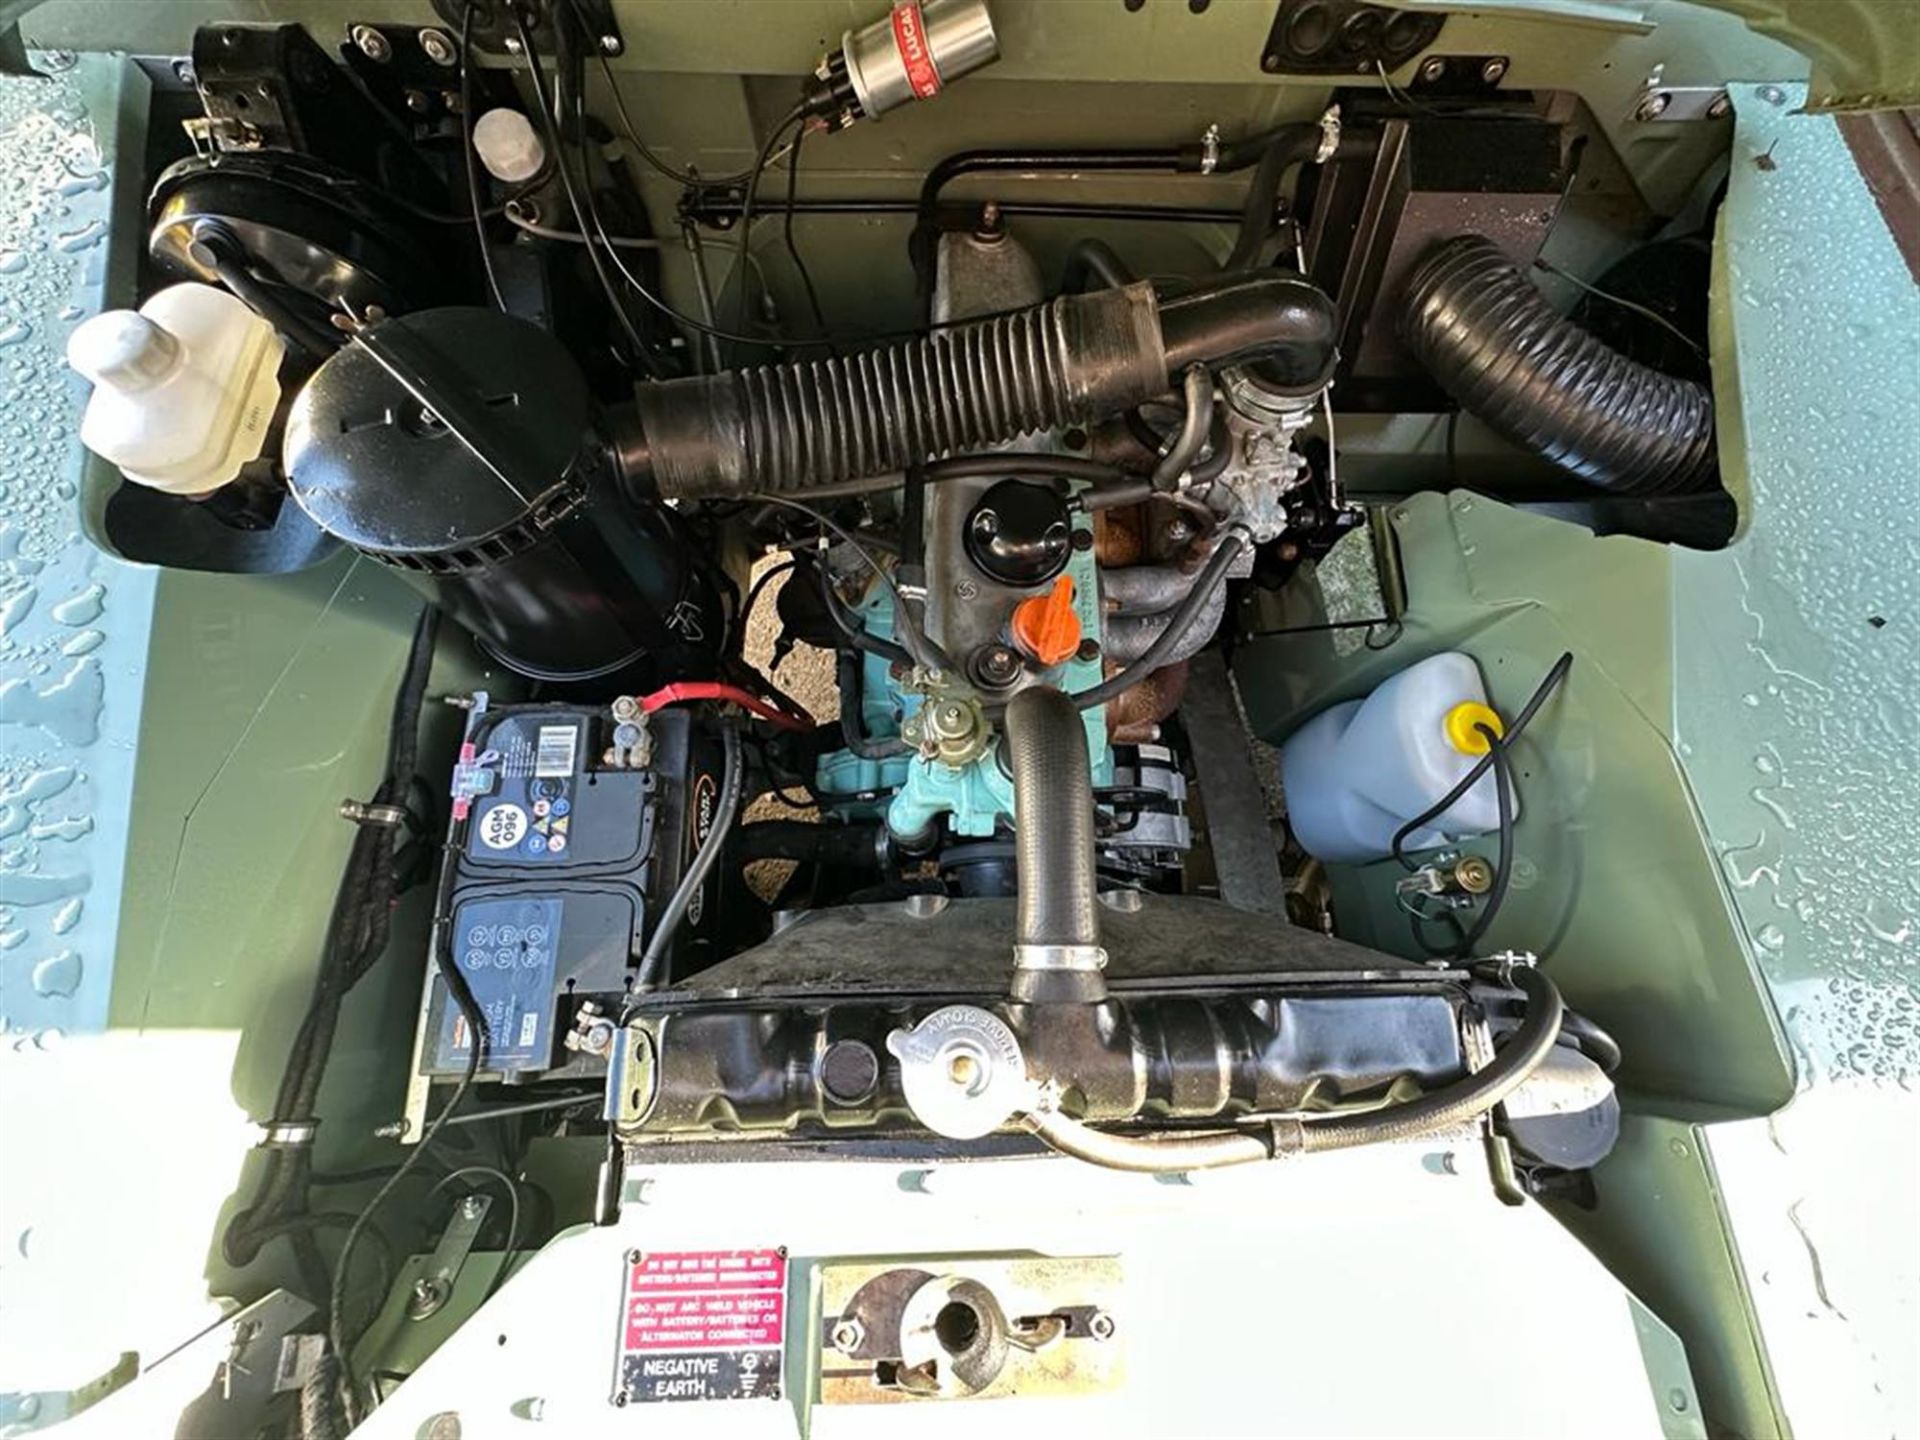 1972 Land Rover Series III 88" SWB - Image 10 of 10